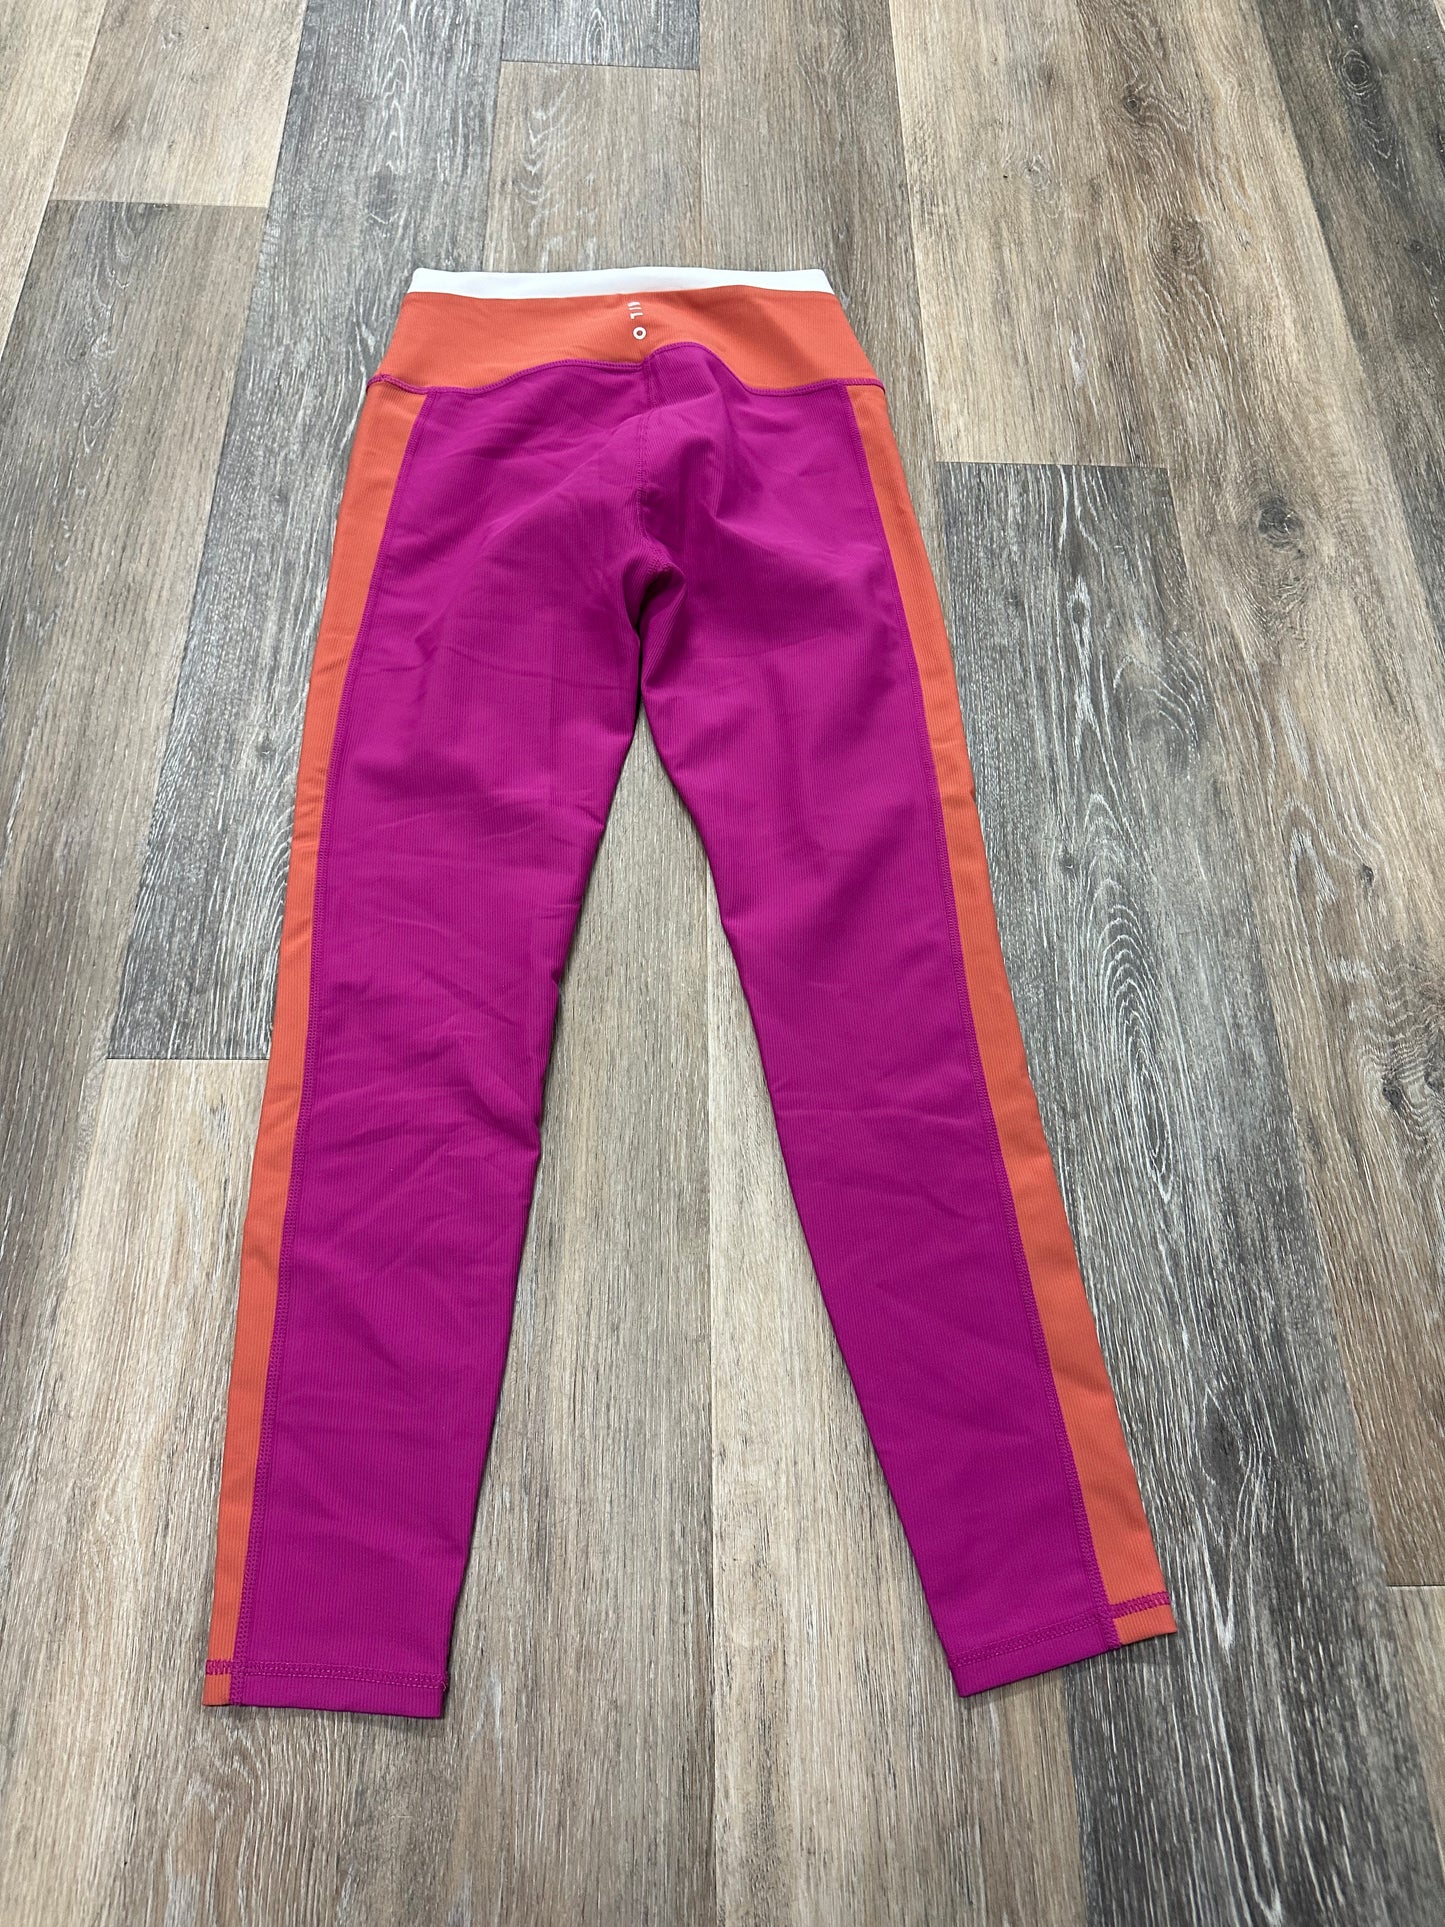 Athletic Leggings By Wilo The Label  Size: M